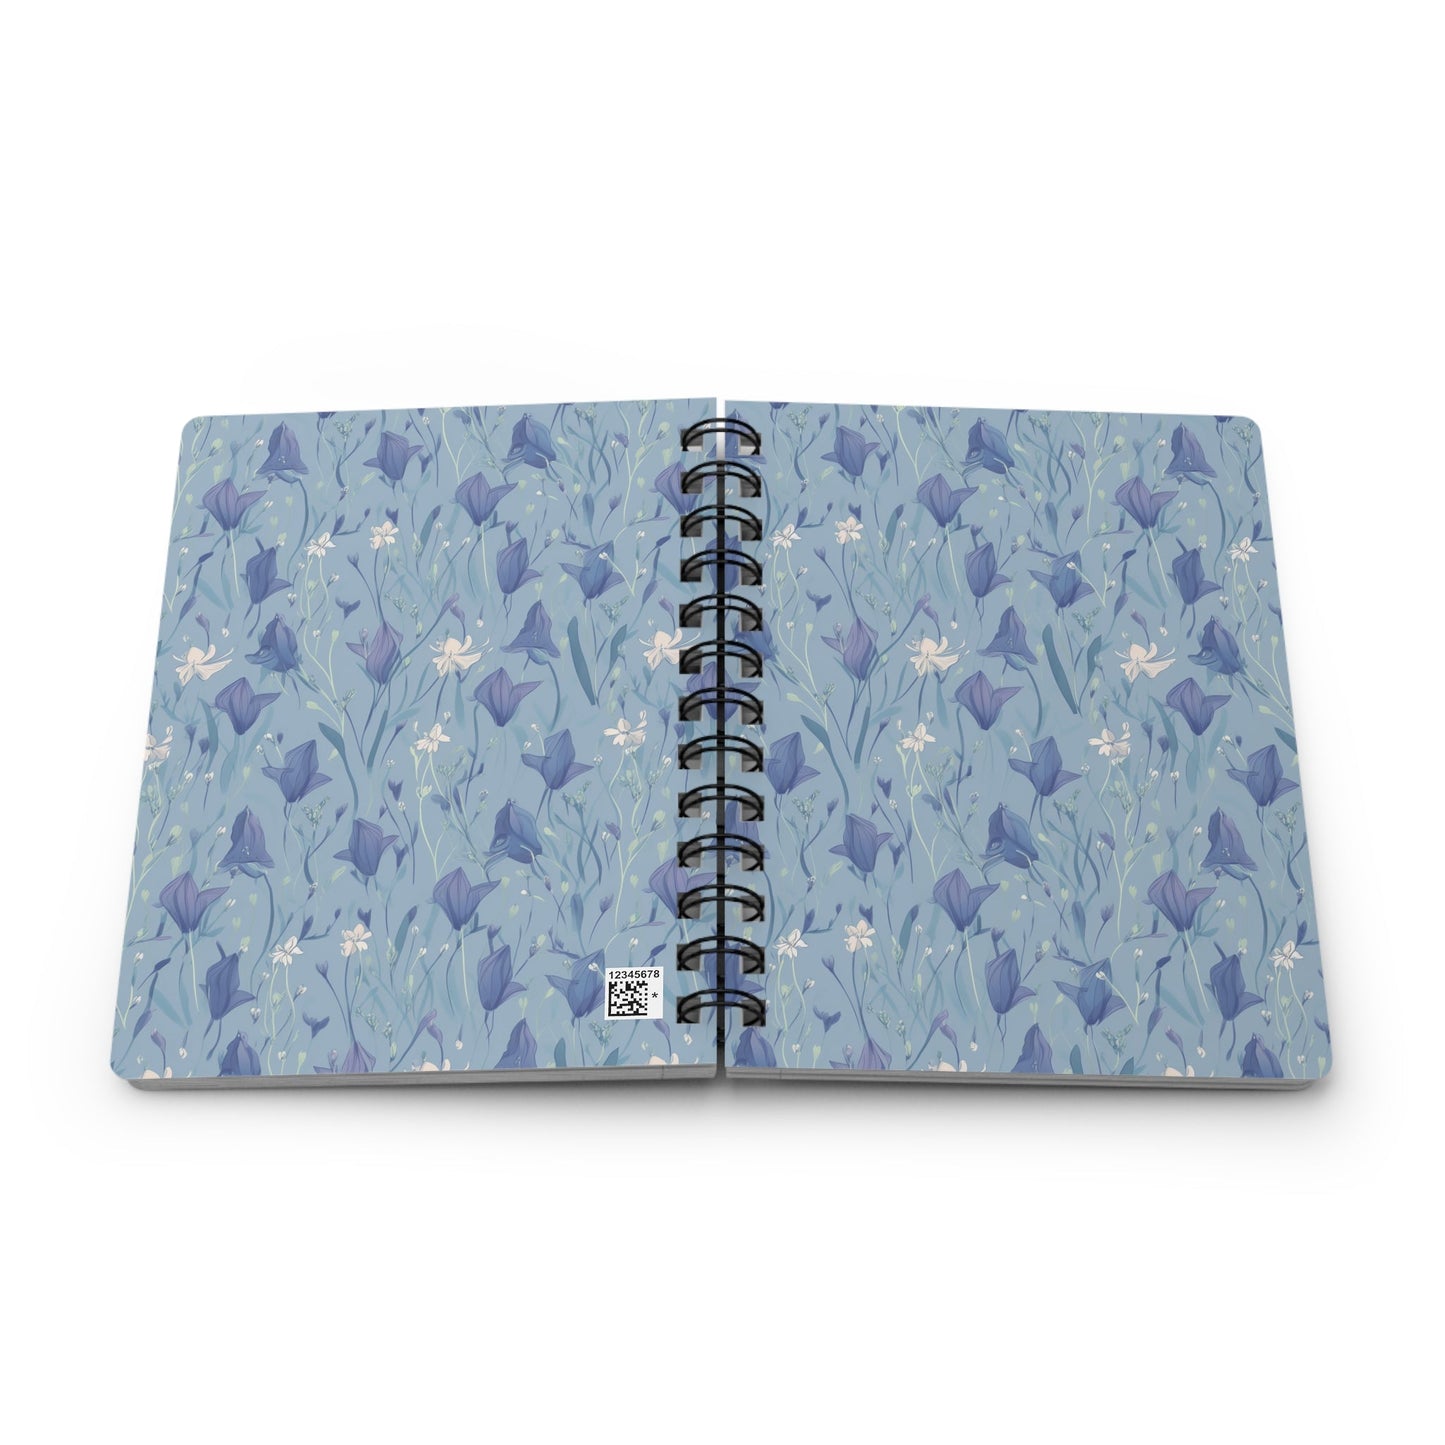 Enchanting Bluebell Harmony Spiral Notebook - Lined Pages with Delicate Floral Cover Paper products Pattern Symphony   